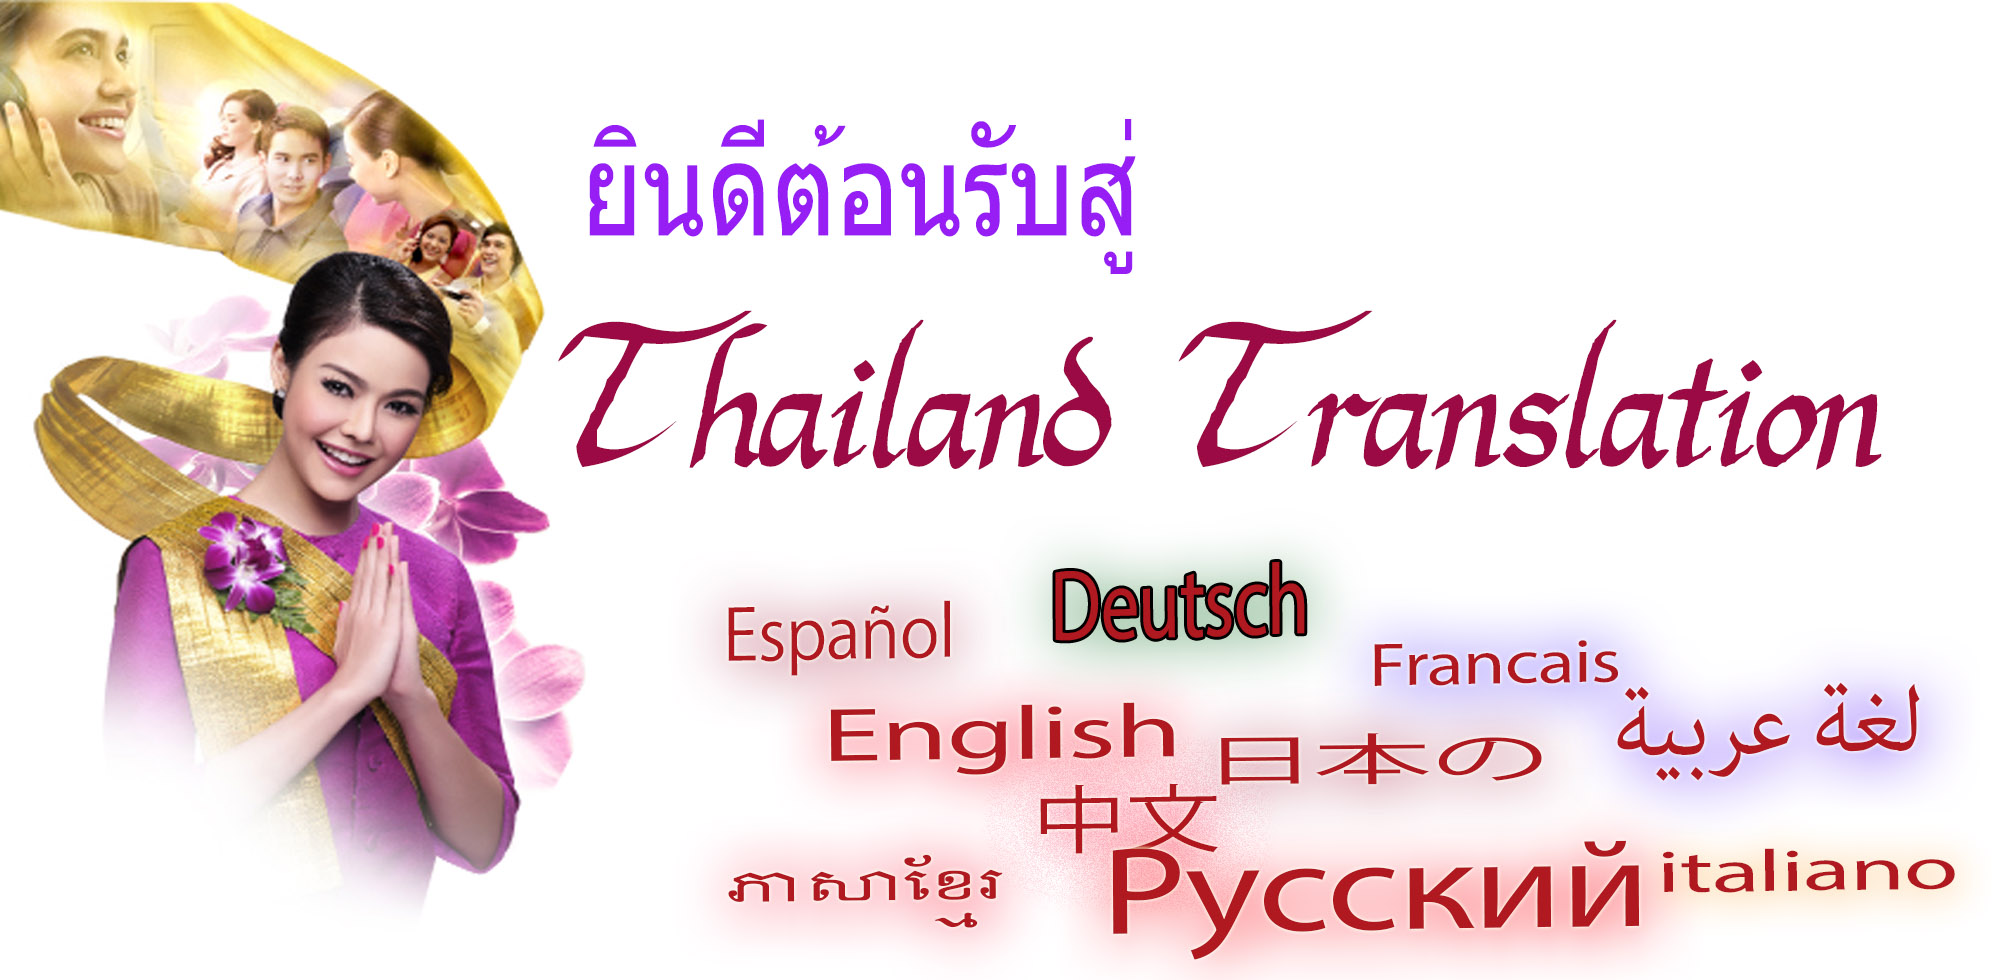 How to Find a Good vietnamese Translation Service Provider?